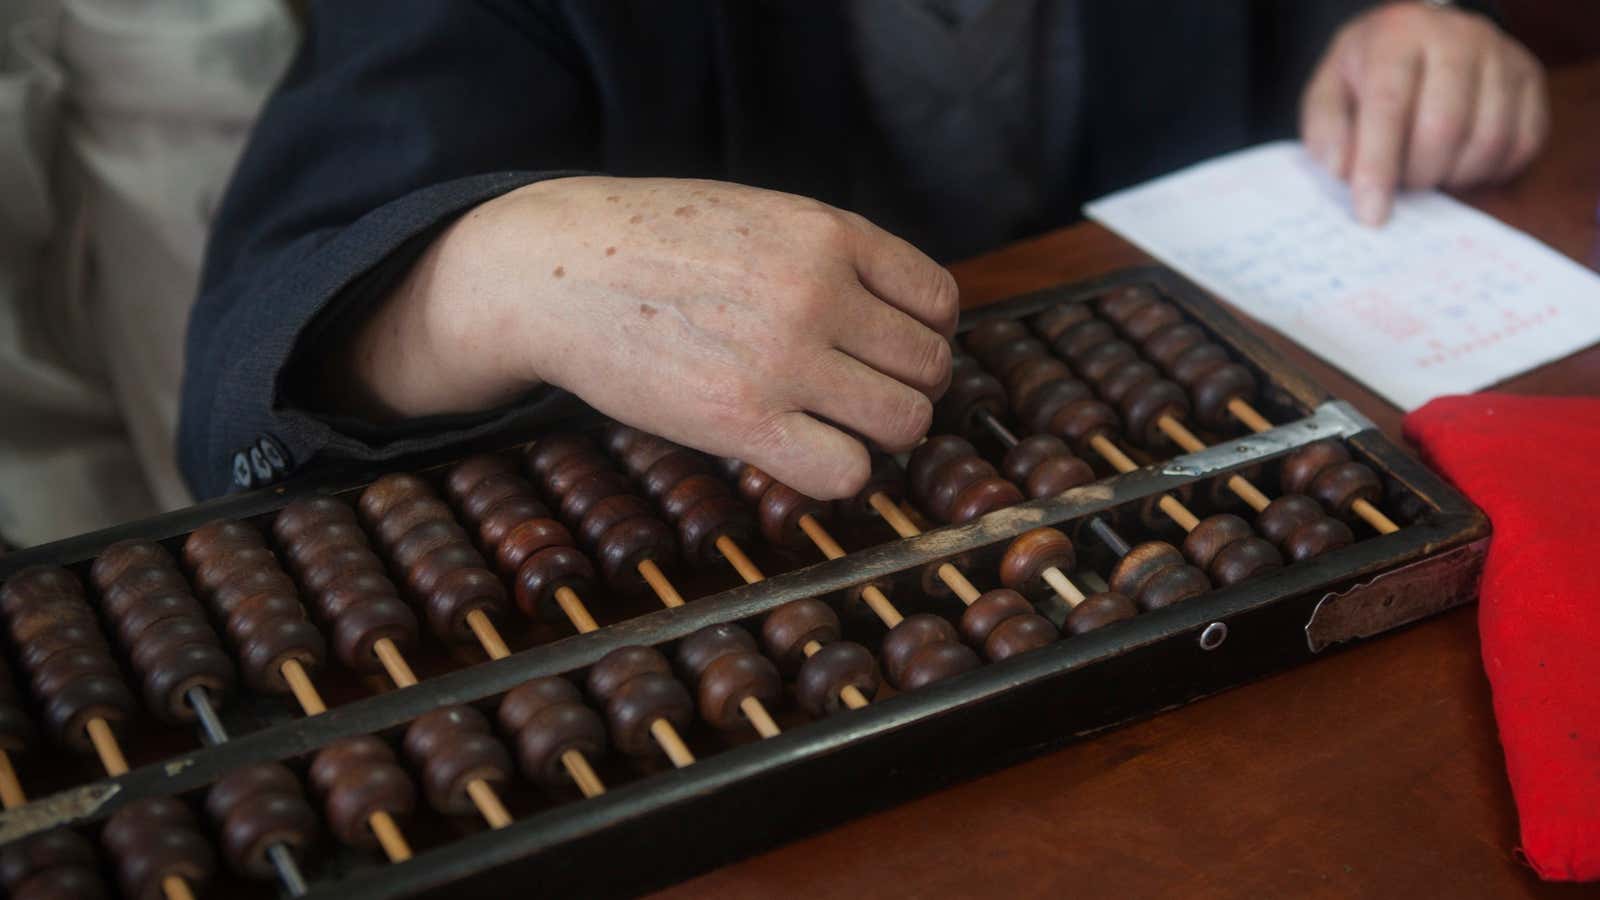 Accounting shenanigans so easy you can do them with an abacus.